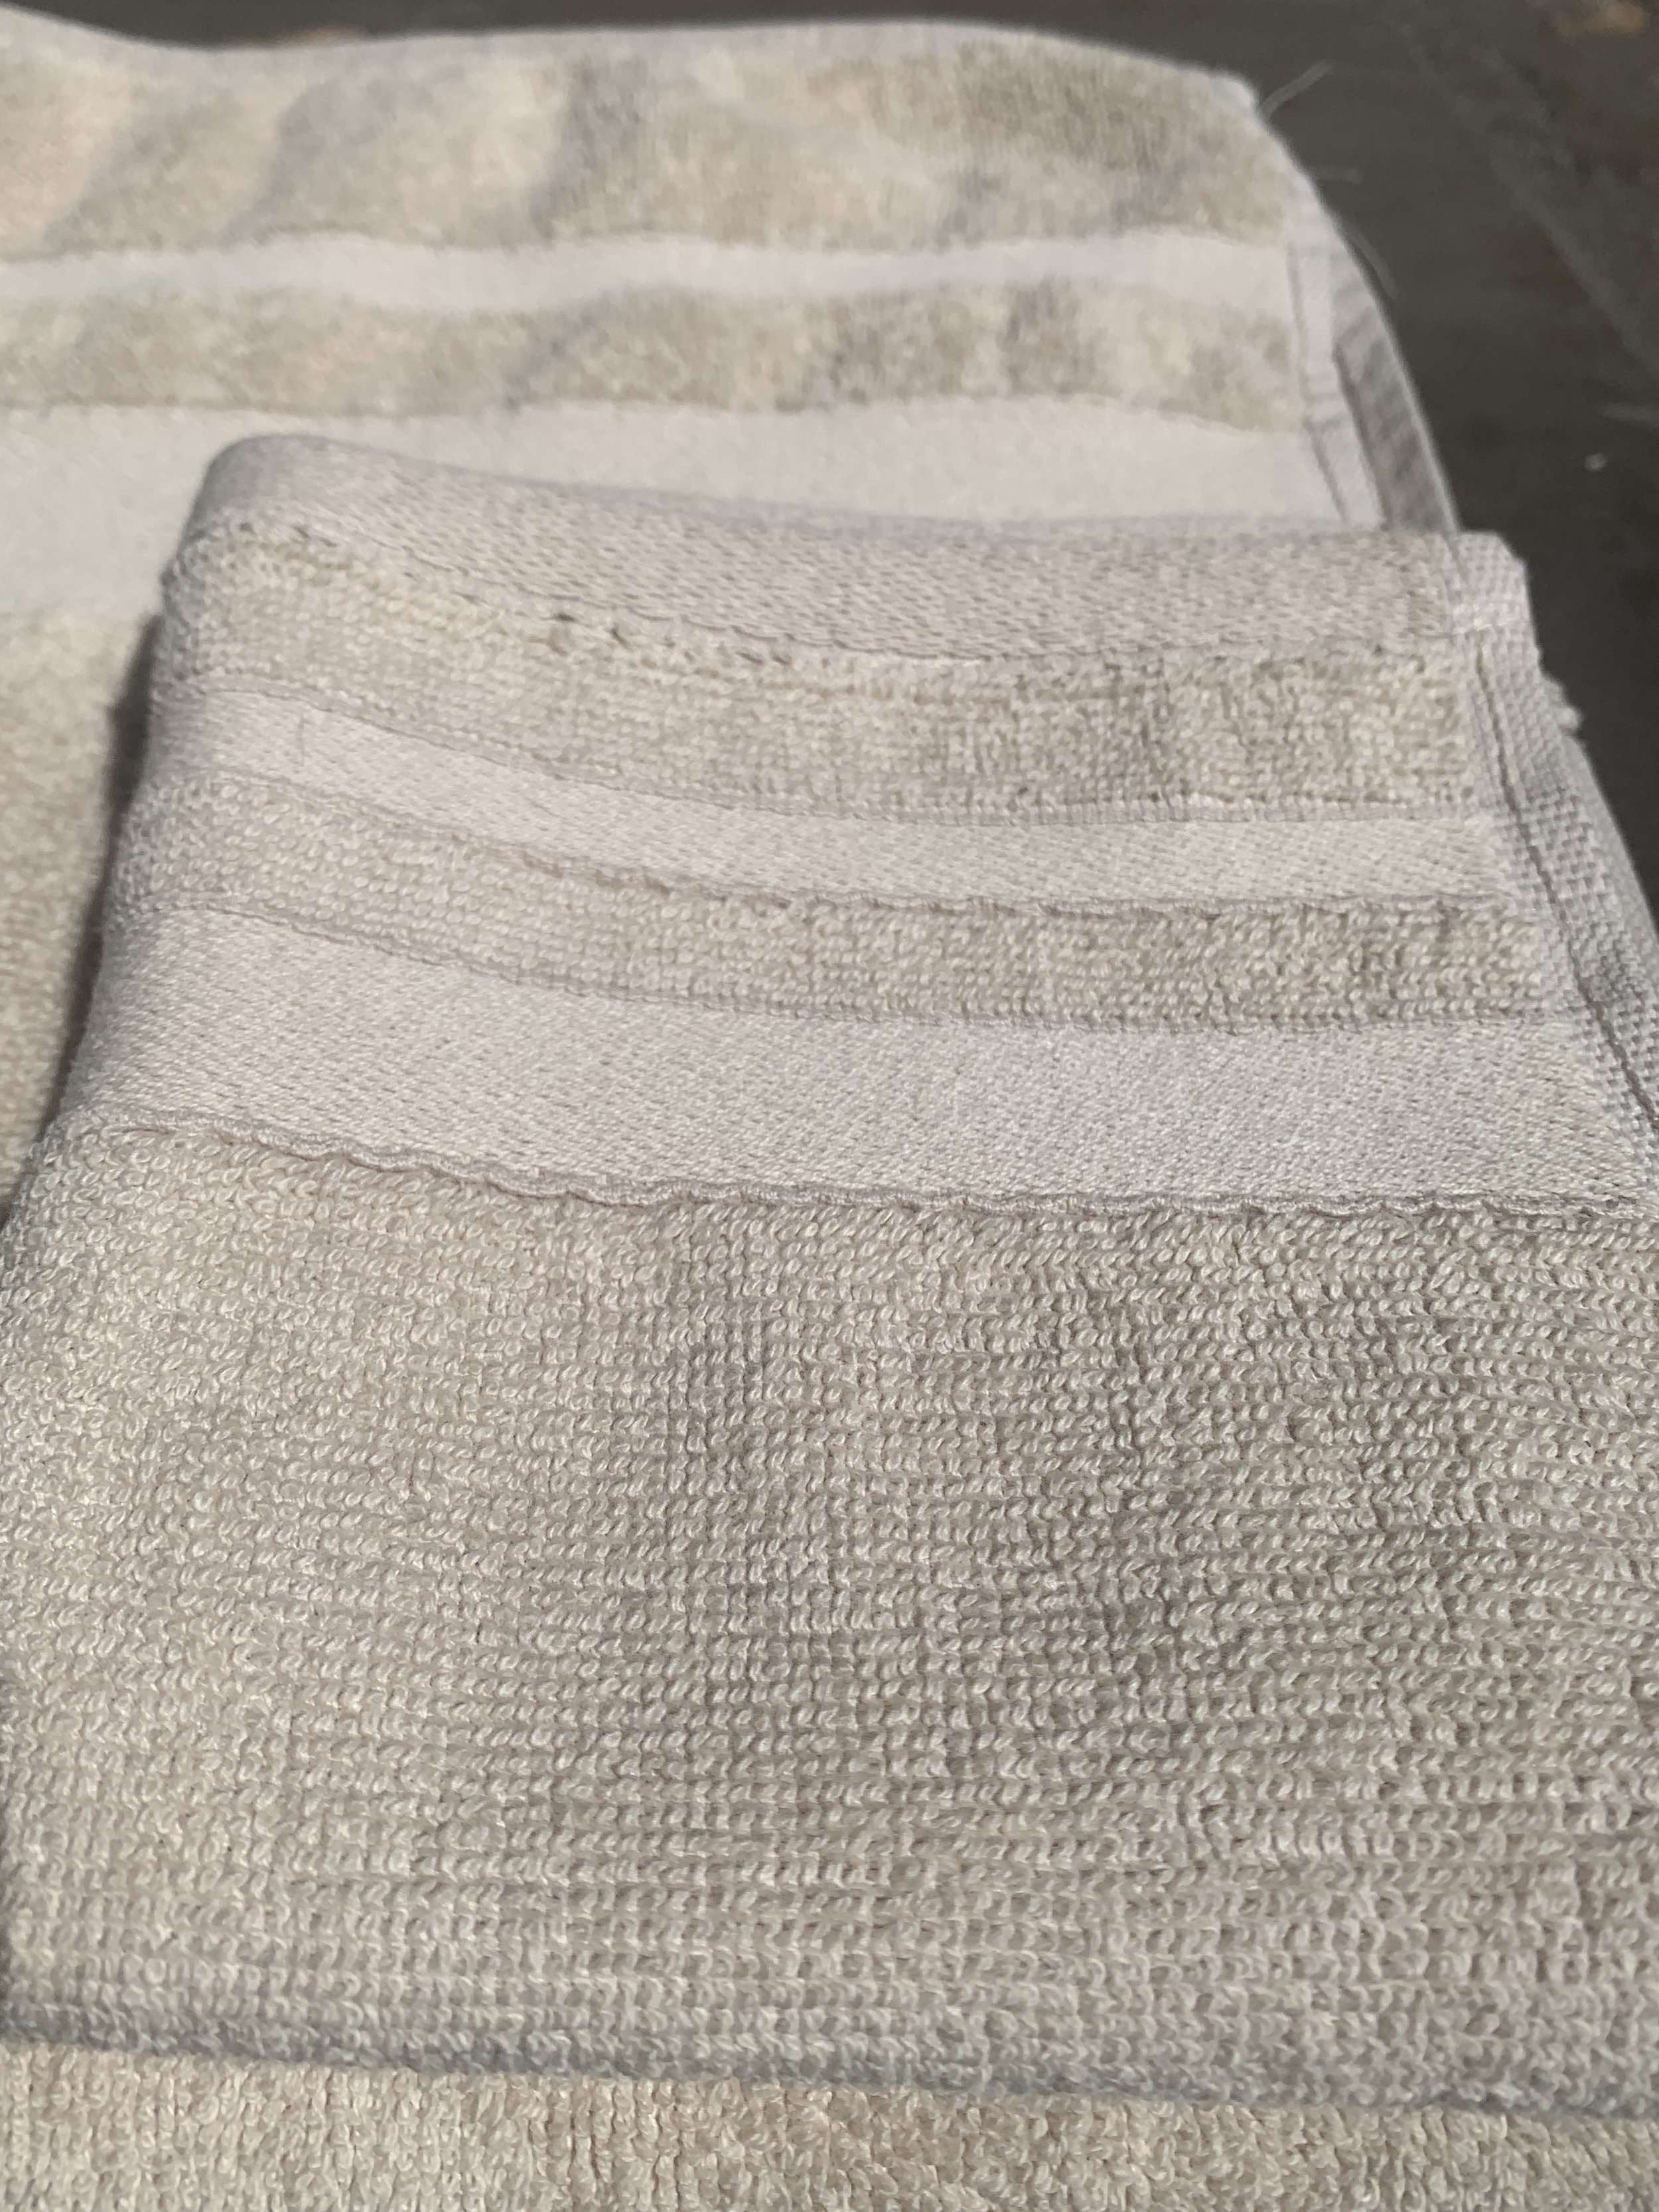 We Upgraded Our Faded Towels To These Textured, Fluffy Delights (You ...